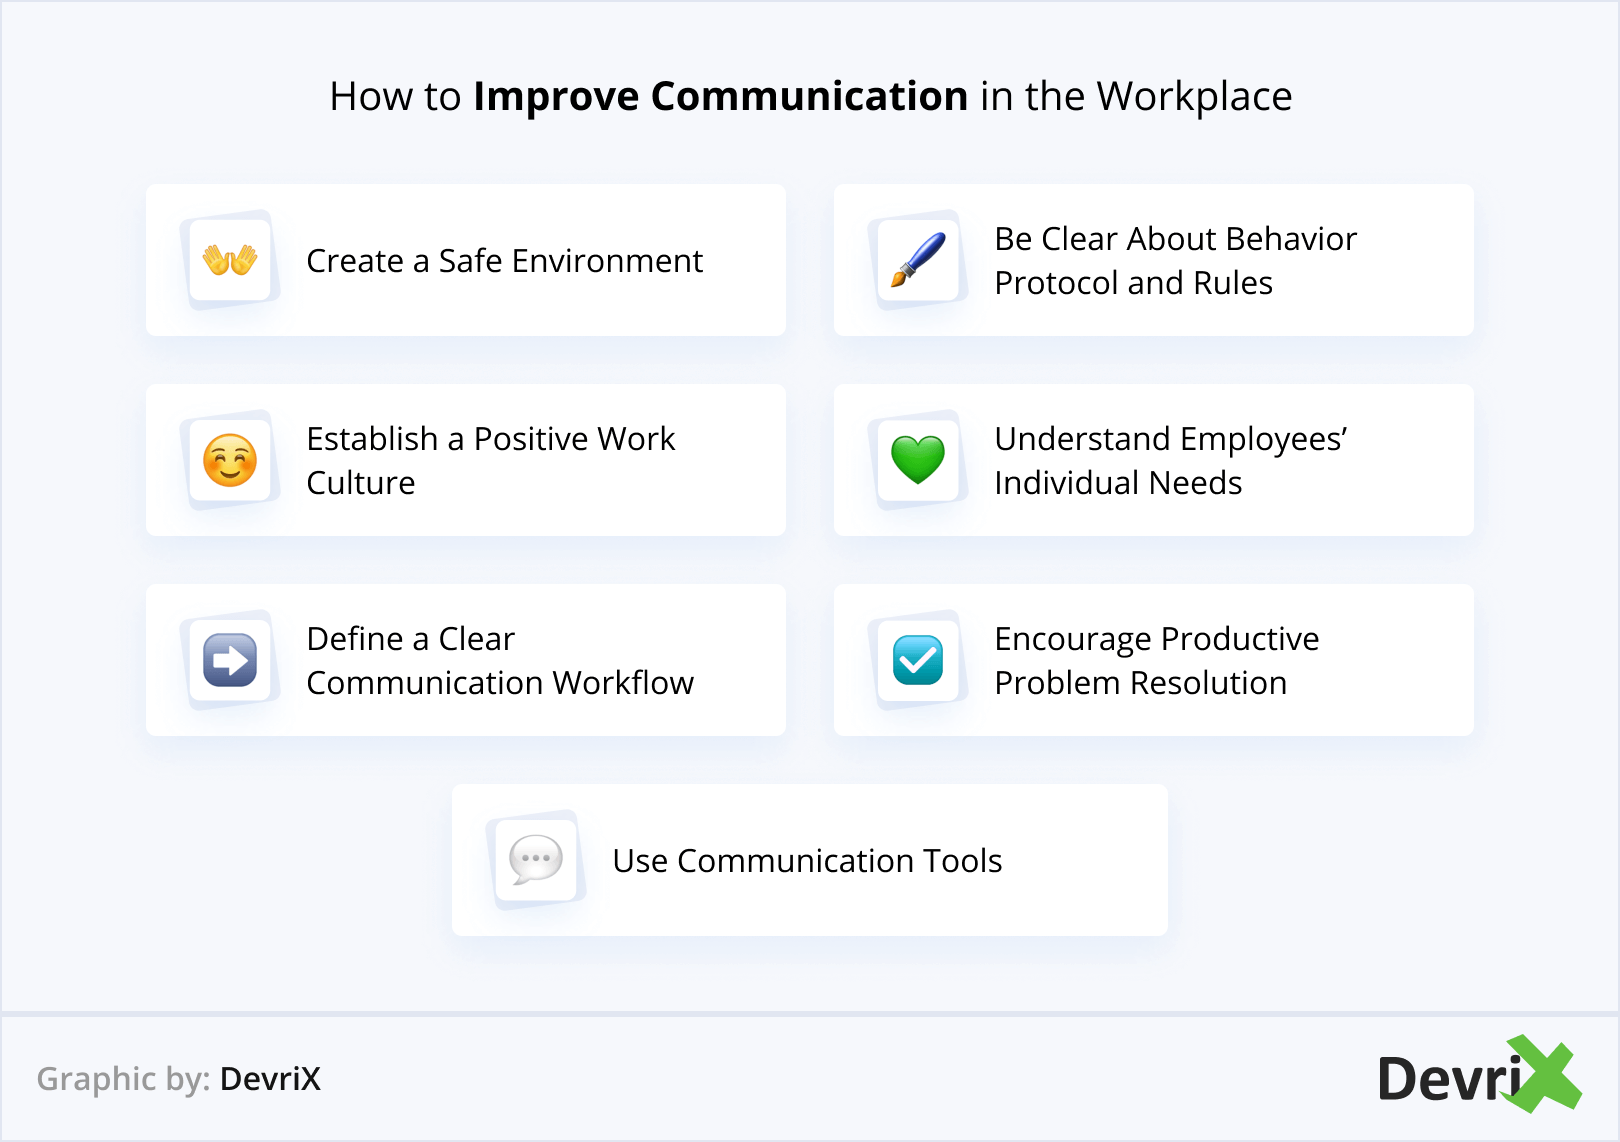 How to Improve Communication in the Workplace